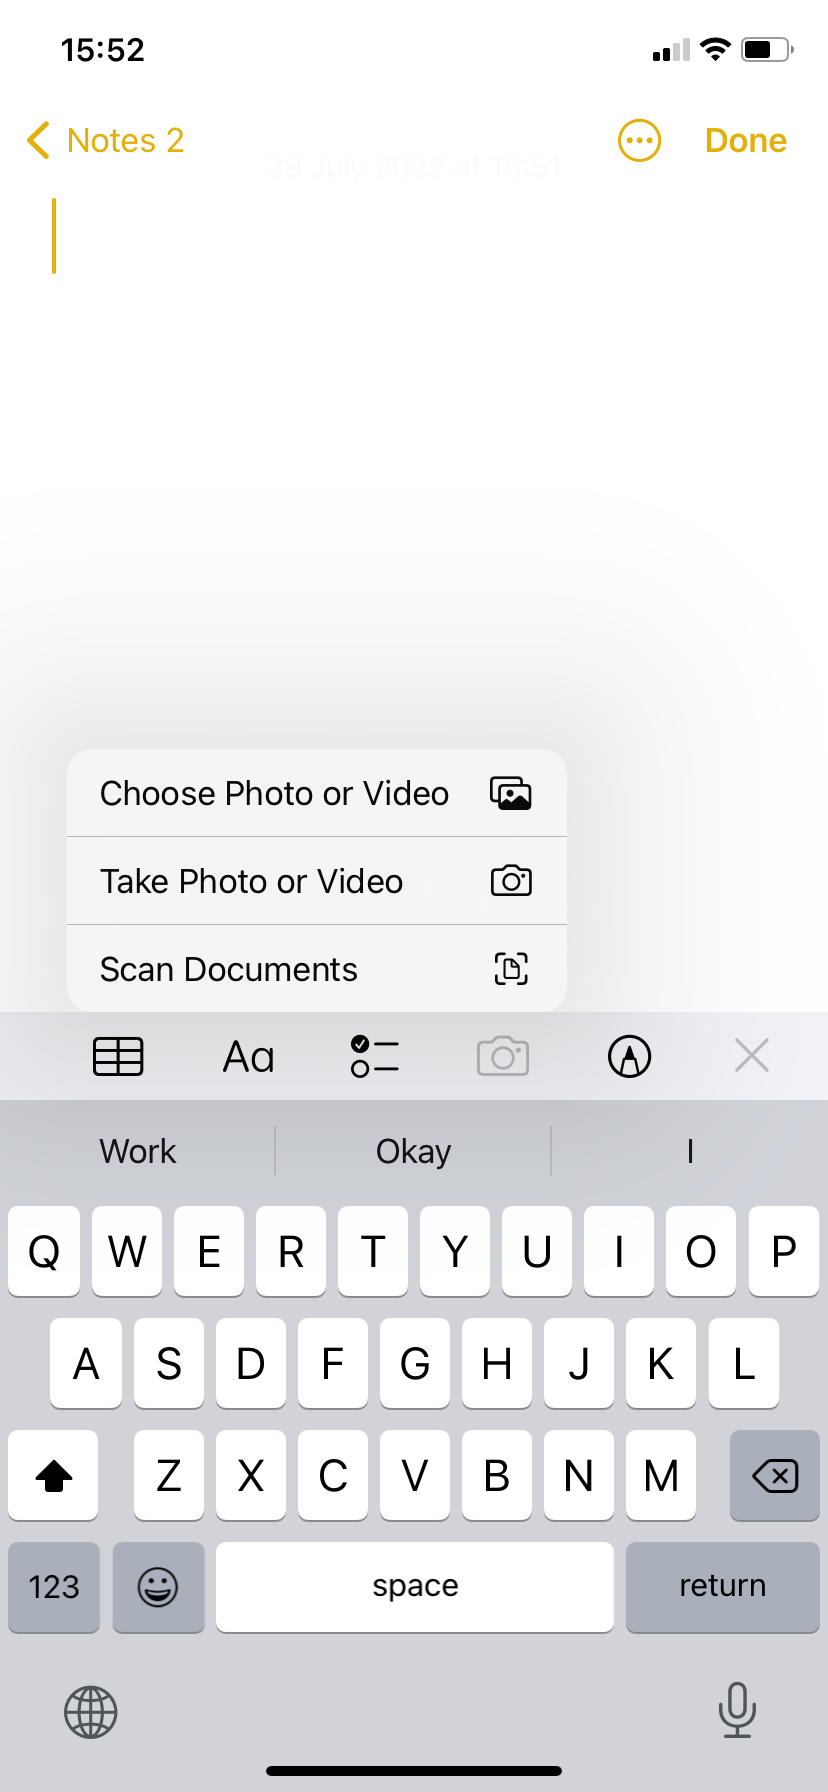 How to scan documents in the iPhone Notes app